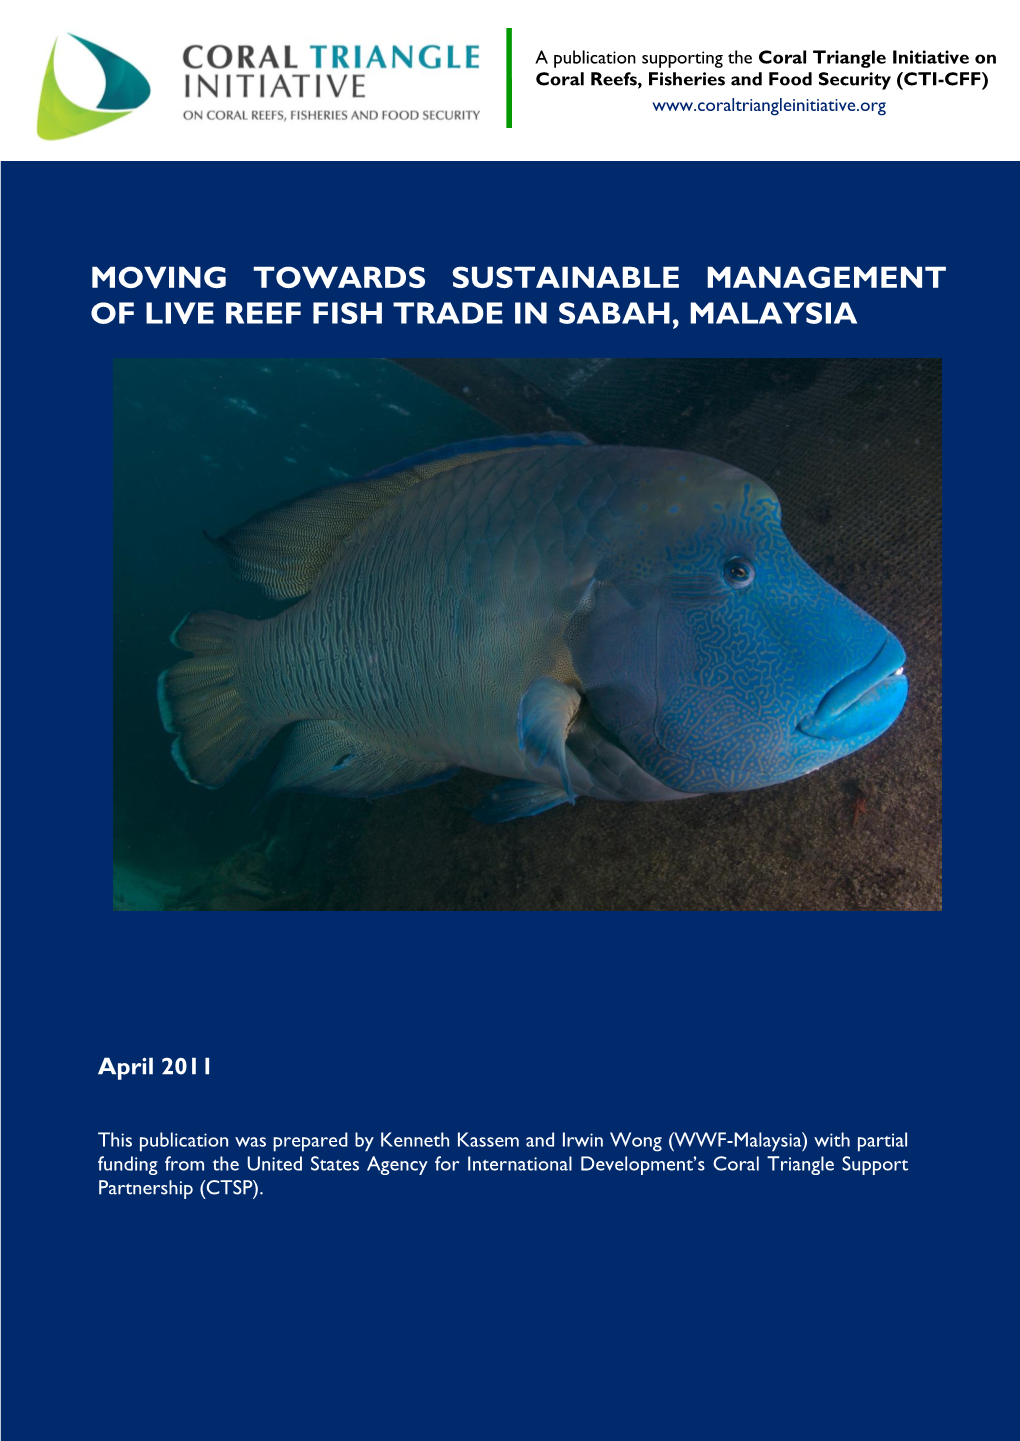 Moving Towards Sustainable Management of Live Reef Fish Trade in Sabah, Malaysia